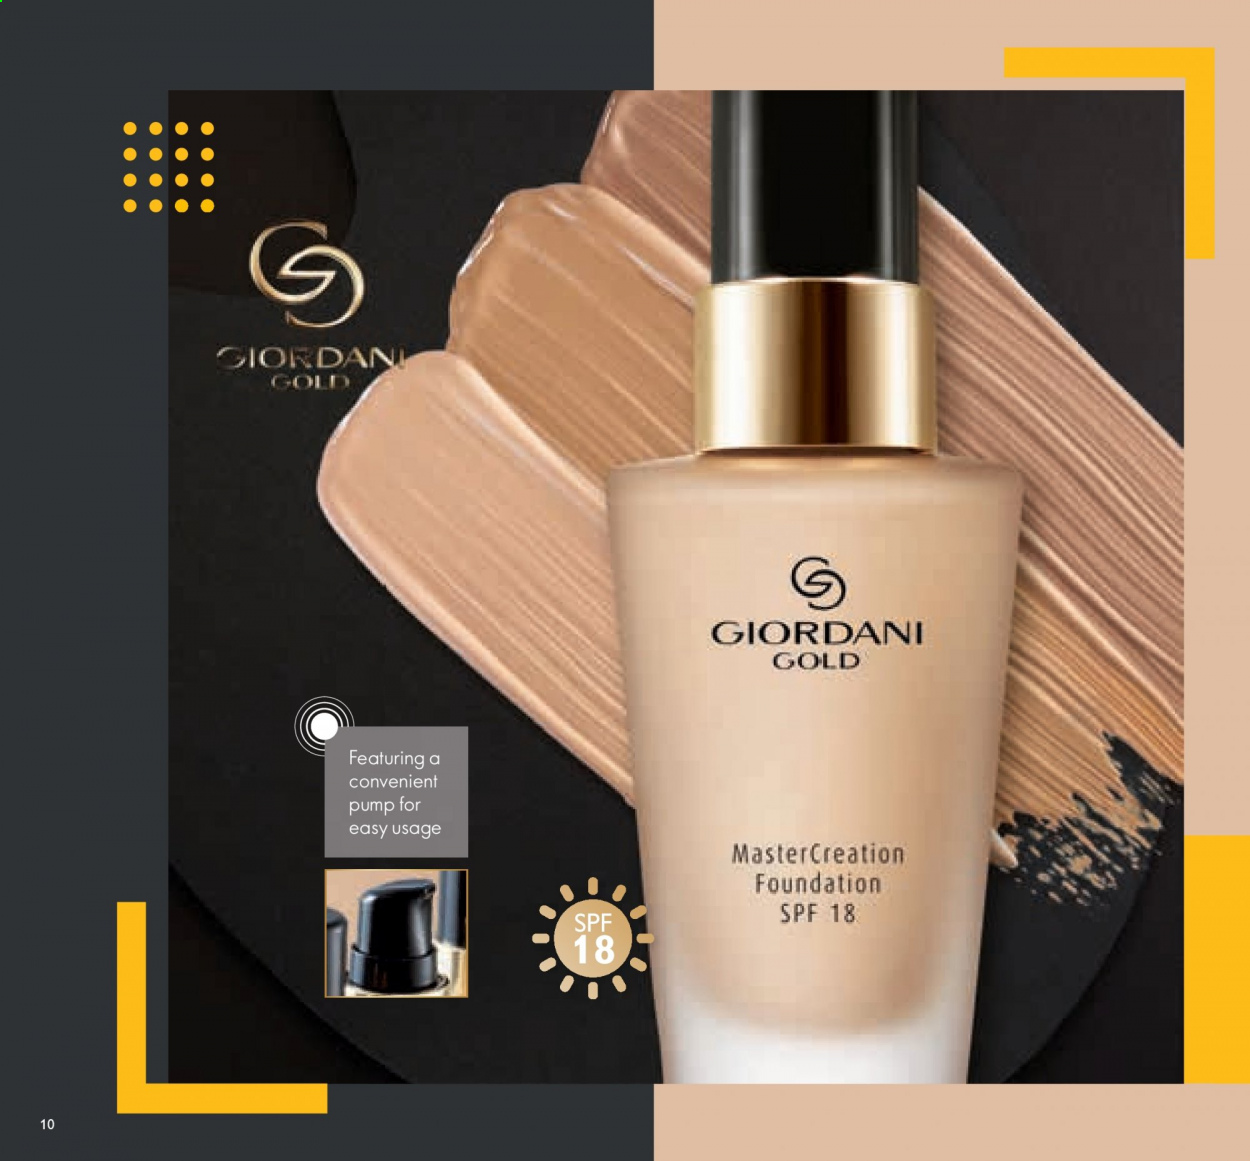 Oriflame offer - 01.06.2021 - 30.06.2021